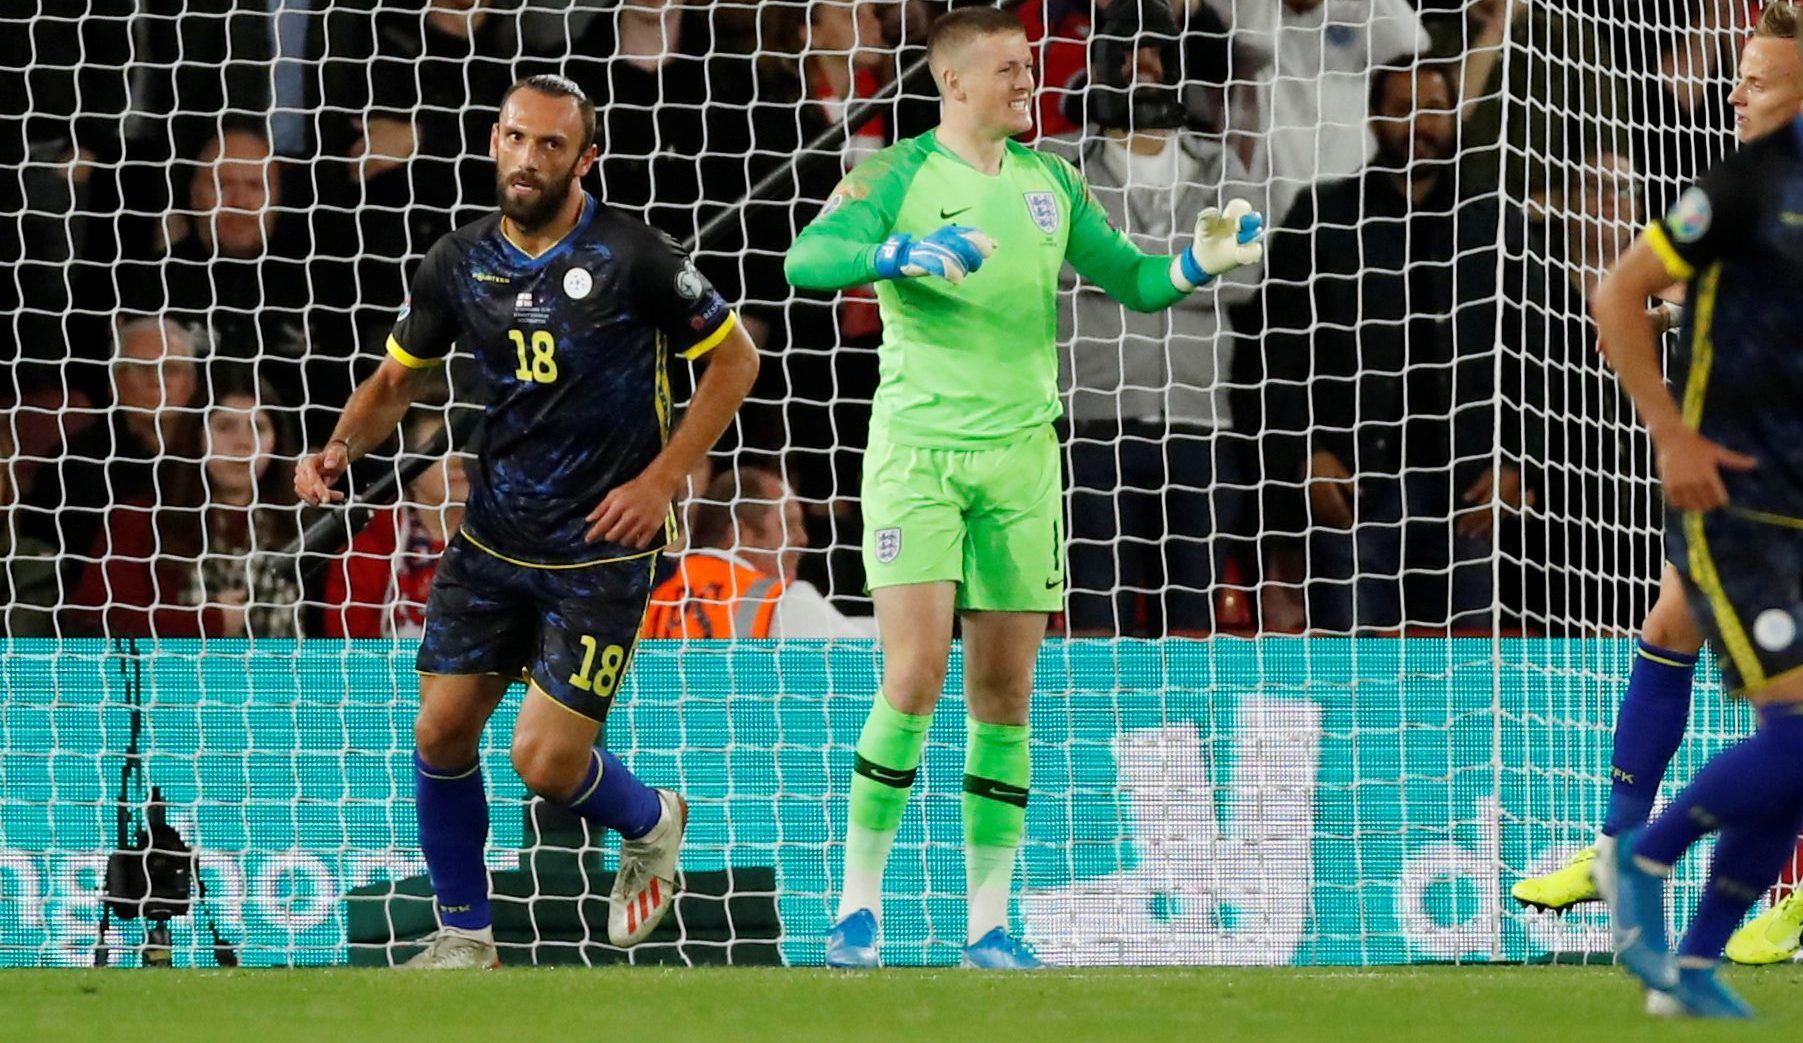 Soccer Football - Euro 2020 Qualifier - Group A - England v Kosovo - St Mary's Stadium, Southampton, Britain - September 10, 2019  Kosovo's Vedat Muriqi celebrates scoring their third goal as England's Jordan Pickford looks dejected   Action Images via Reuters/Andrew Boyers